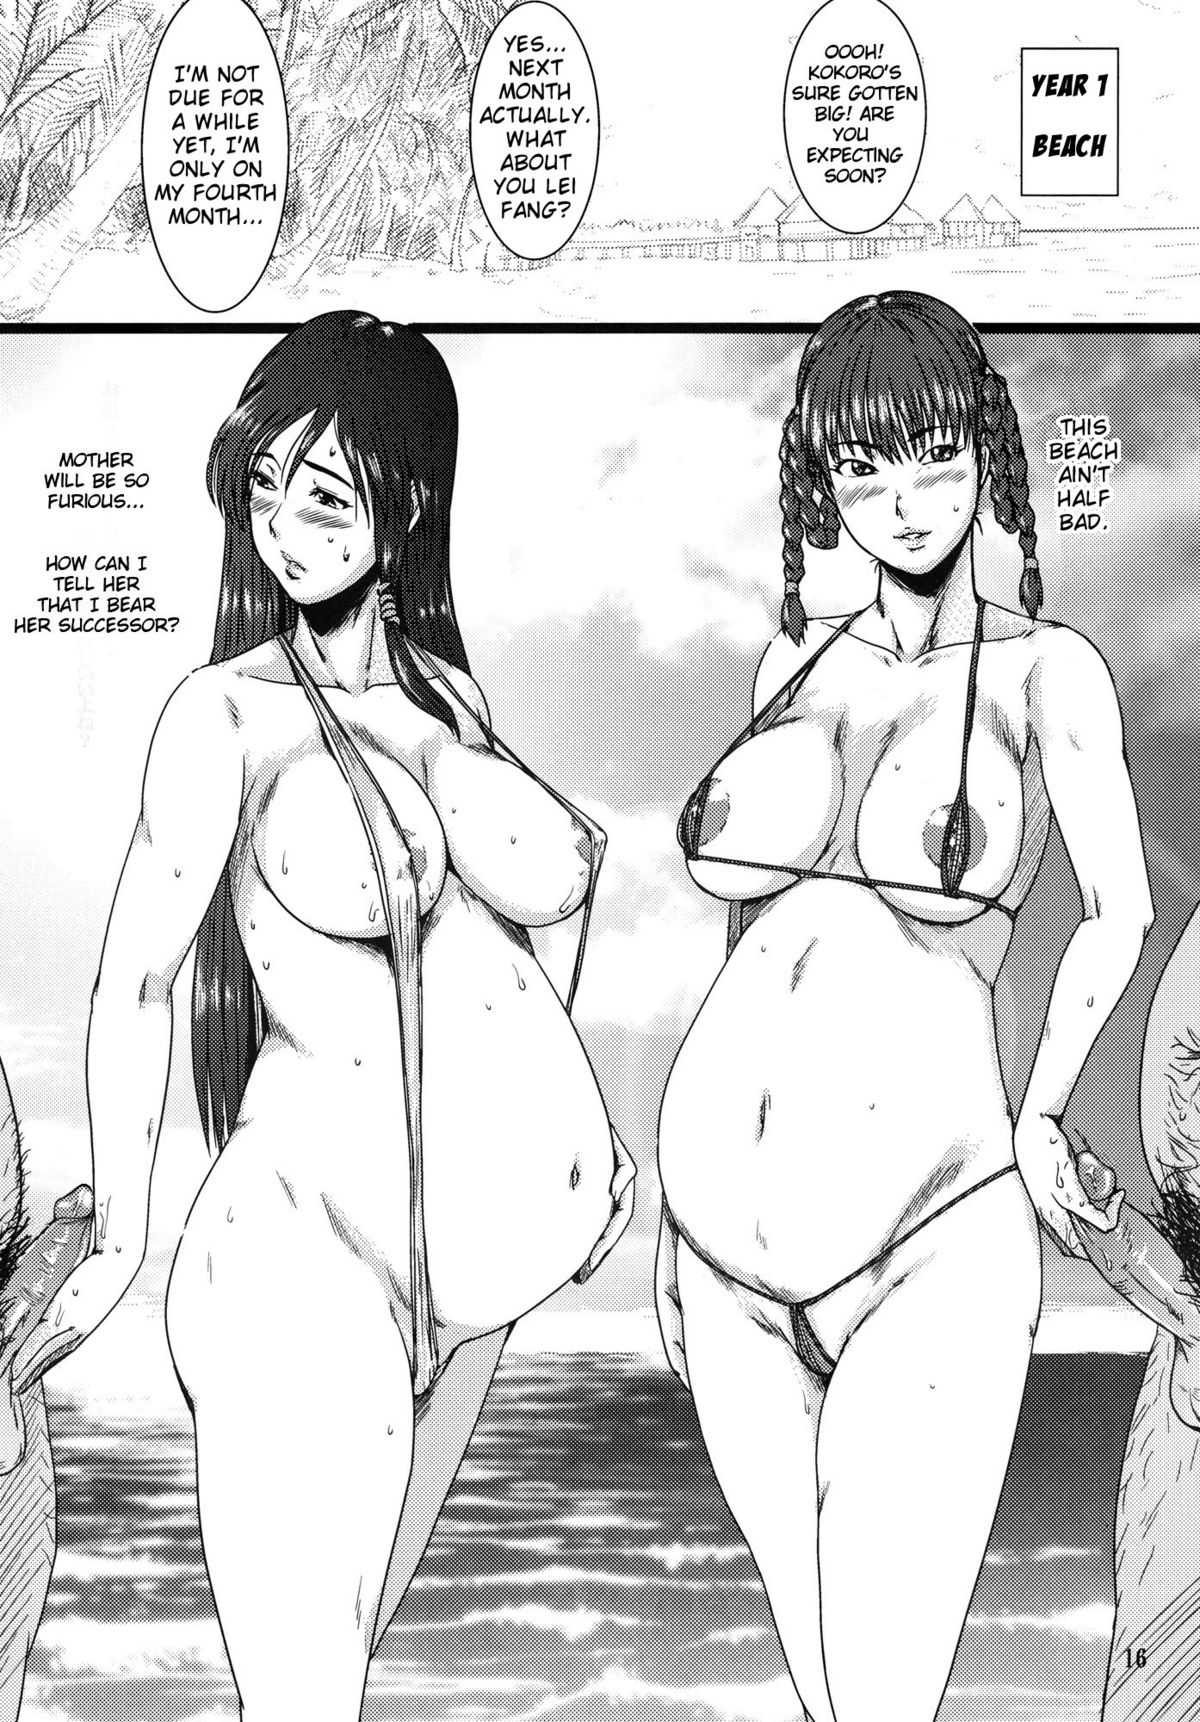 [Dashigara 100%] As Expected, This Has Nothing to do with Volley-Ball [Eng] (Dead or Alive) {doujin-moe.us} 